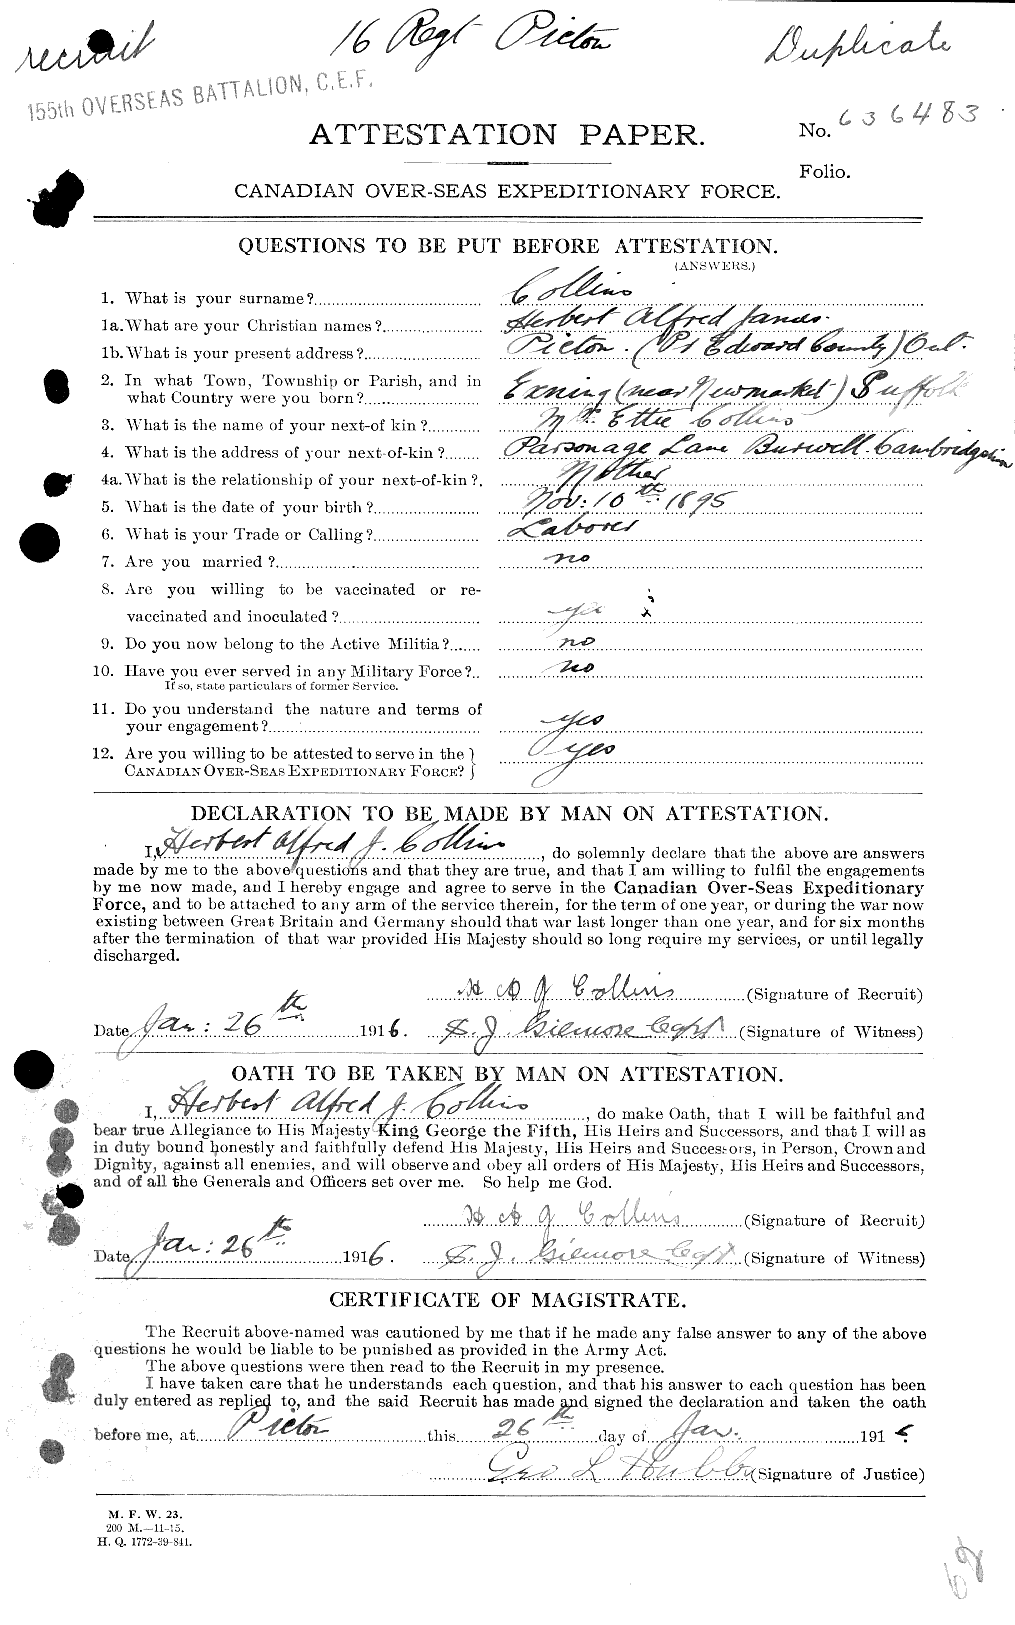 Personnel Records of the First World War - CEF 042302a